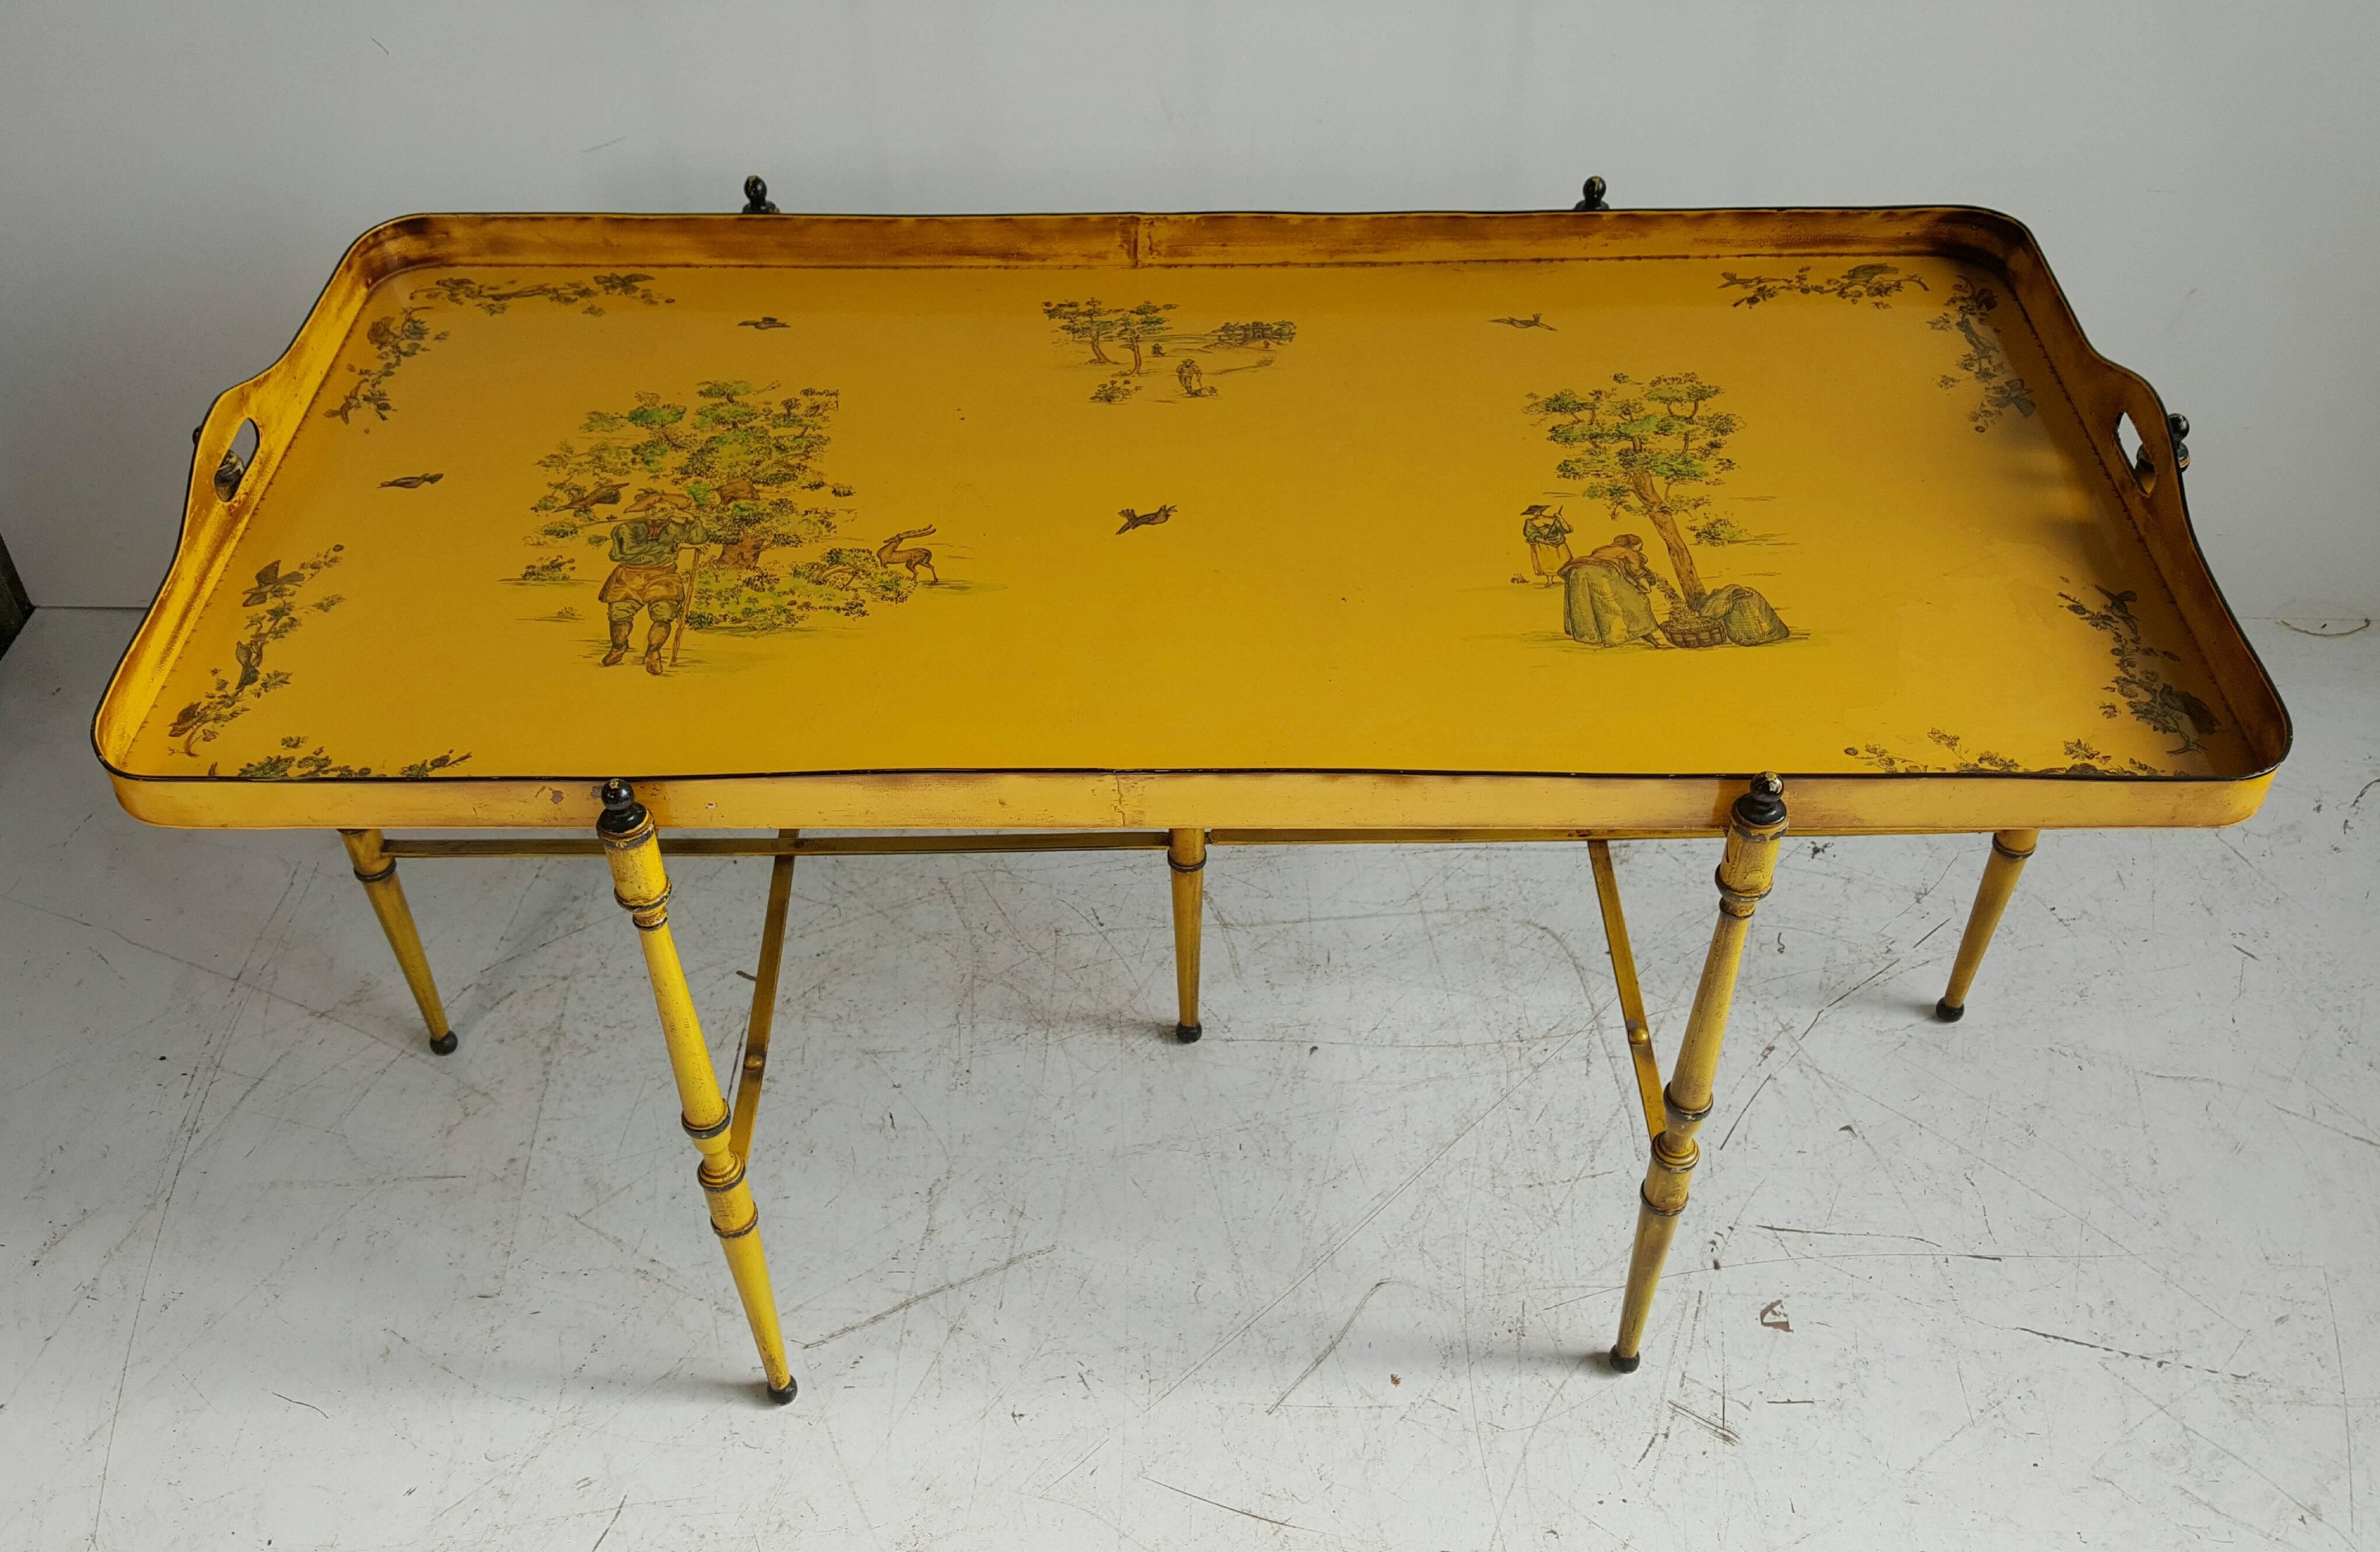 Late 20th century Italian tole tray table of painted metal in yellow, featuring wonderful hand-painted scenes Asian inspired, rich vibrant colors, all resting upon a folding metal stand of yellow with black accents, large removable tray.